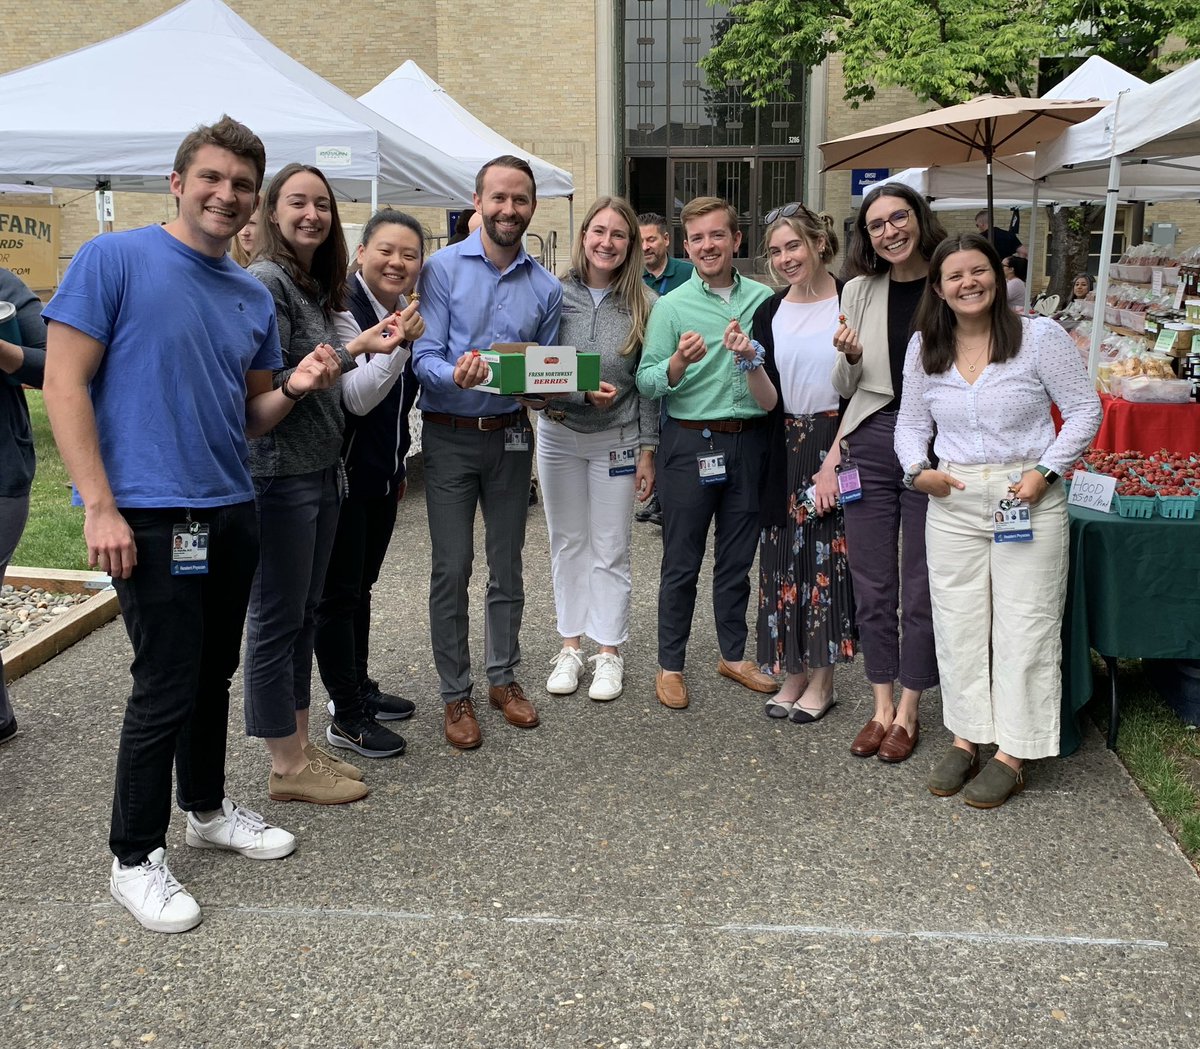 First day of orientation for our new @ohsuobgyn interns! Of course this necessitated a stop at the farmers market for their first Hood strawberries. 🍓